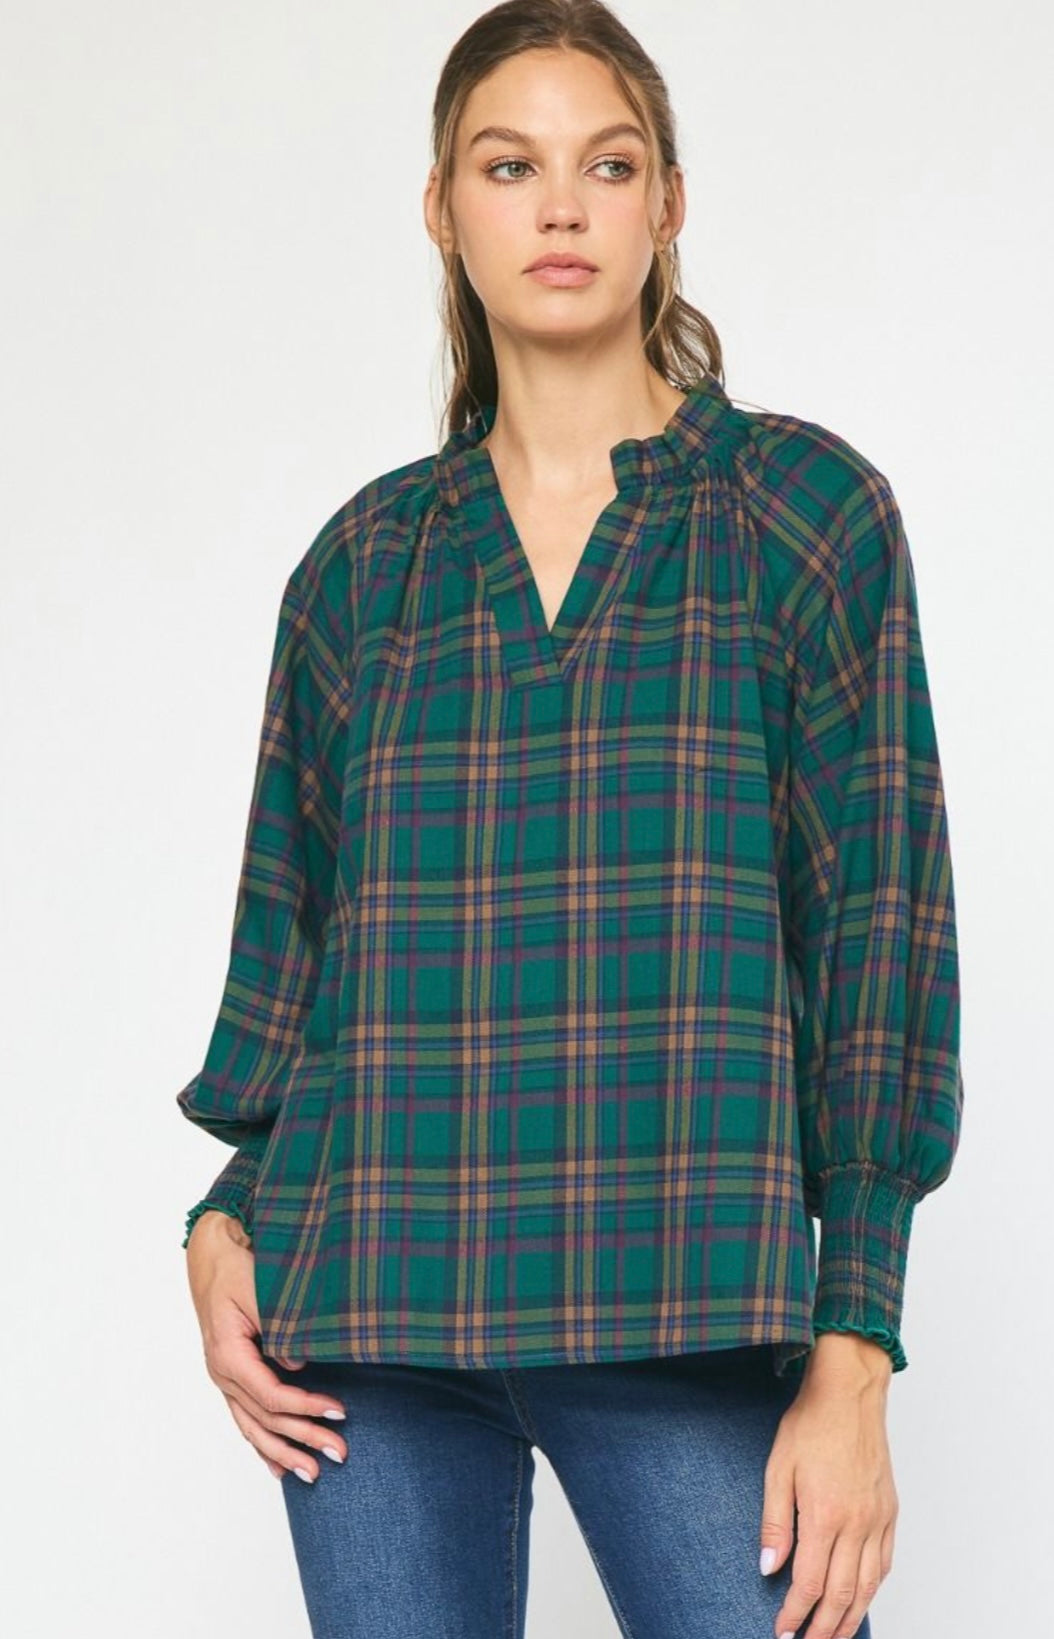 The Greenhouse Plaid Top